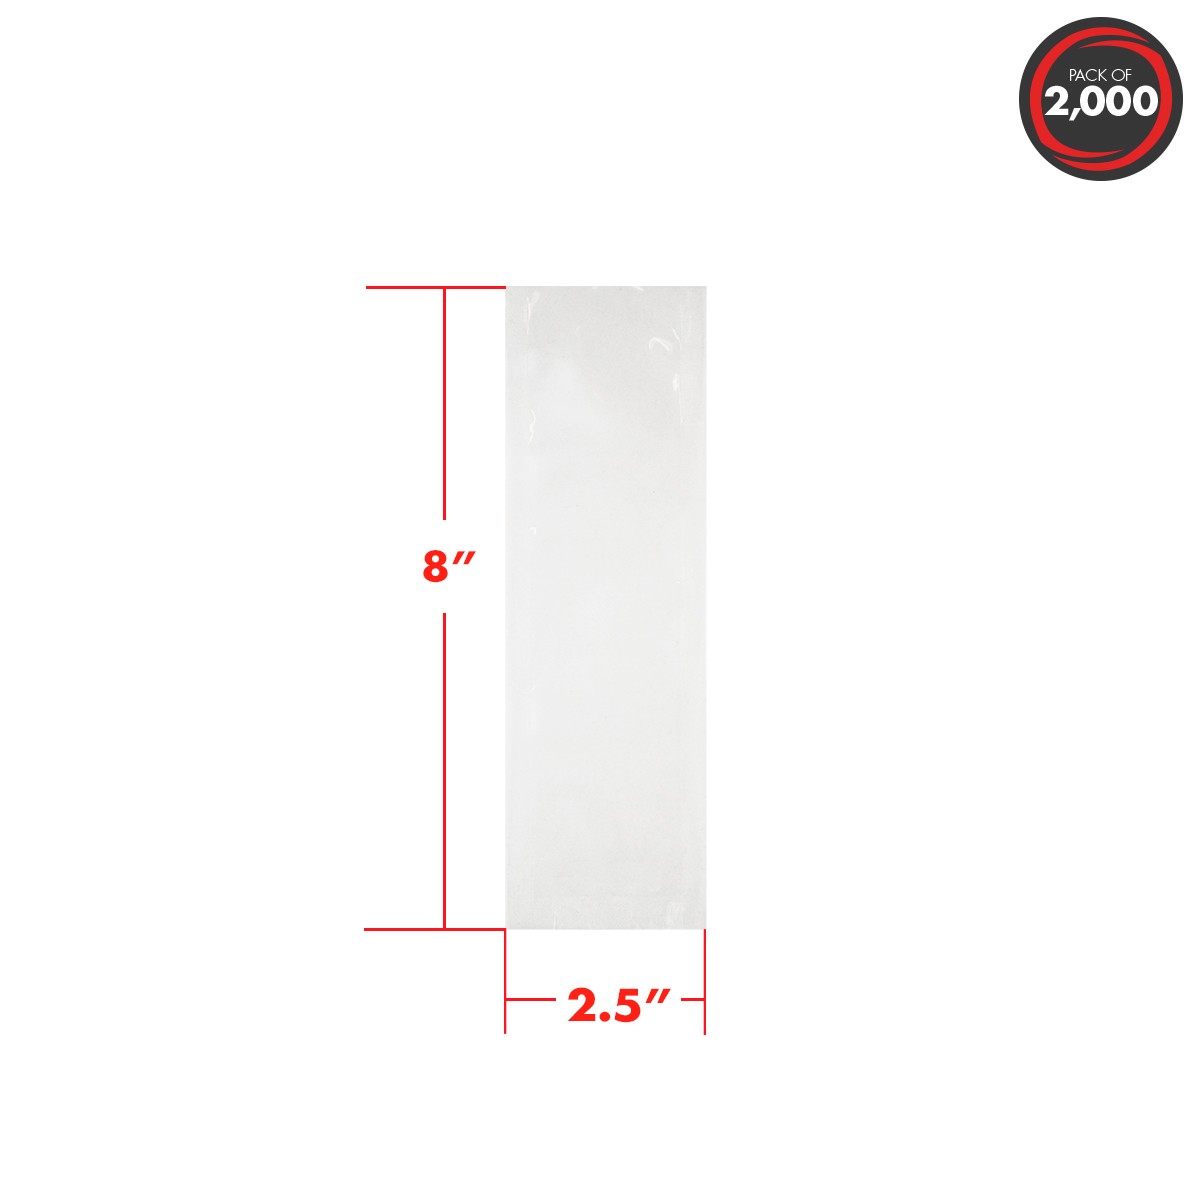 8 x 12 FlairPak 300 Chamber Vacuum Seal Pouches (3 Mil) - Case of 1000